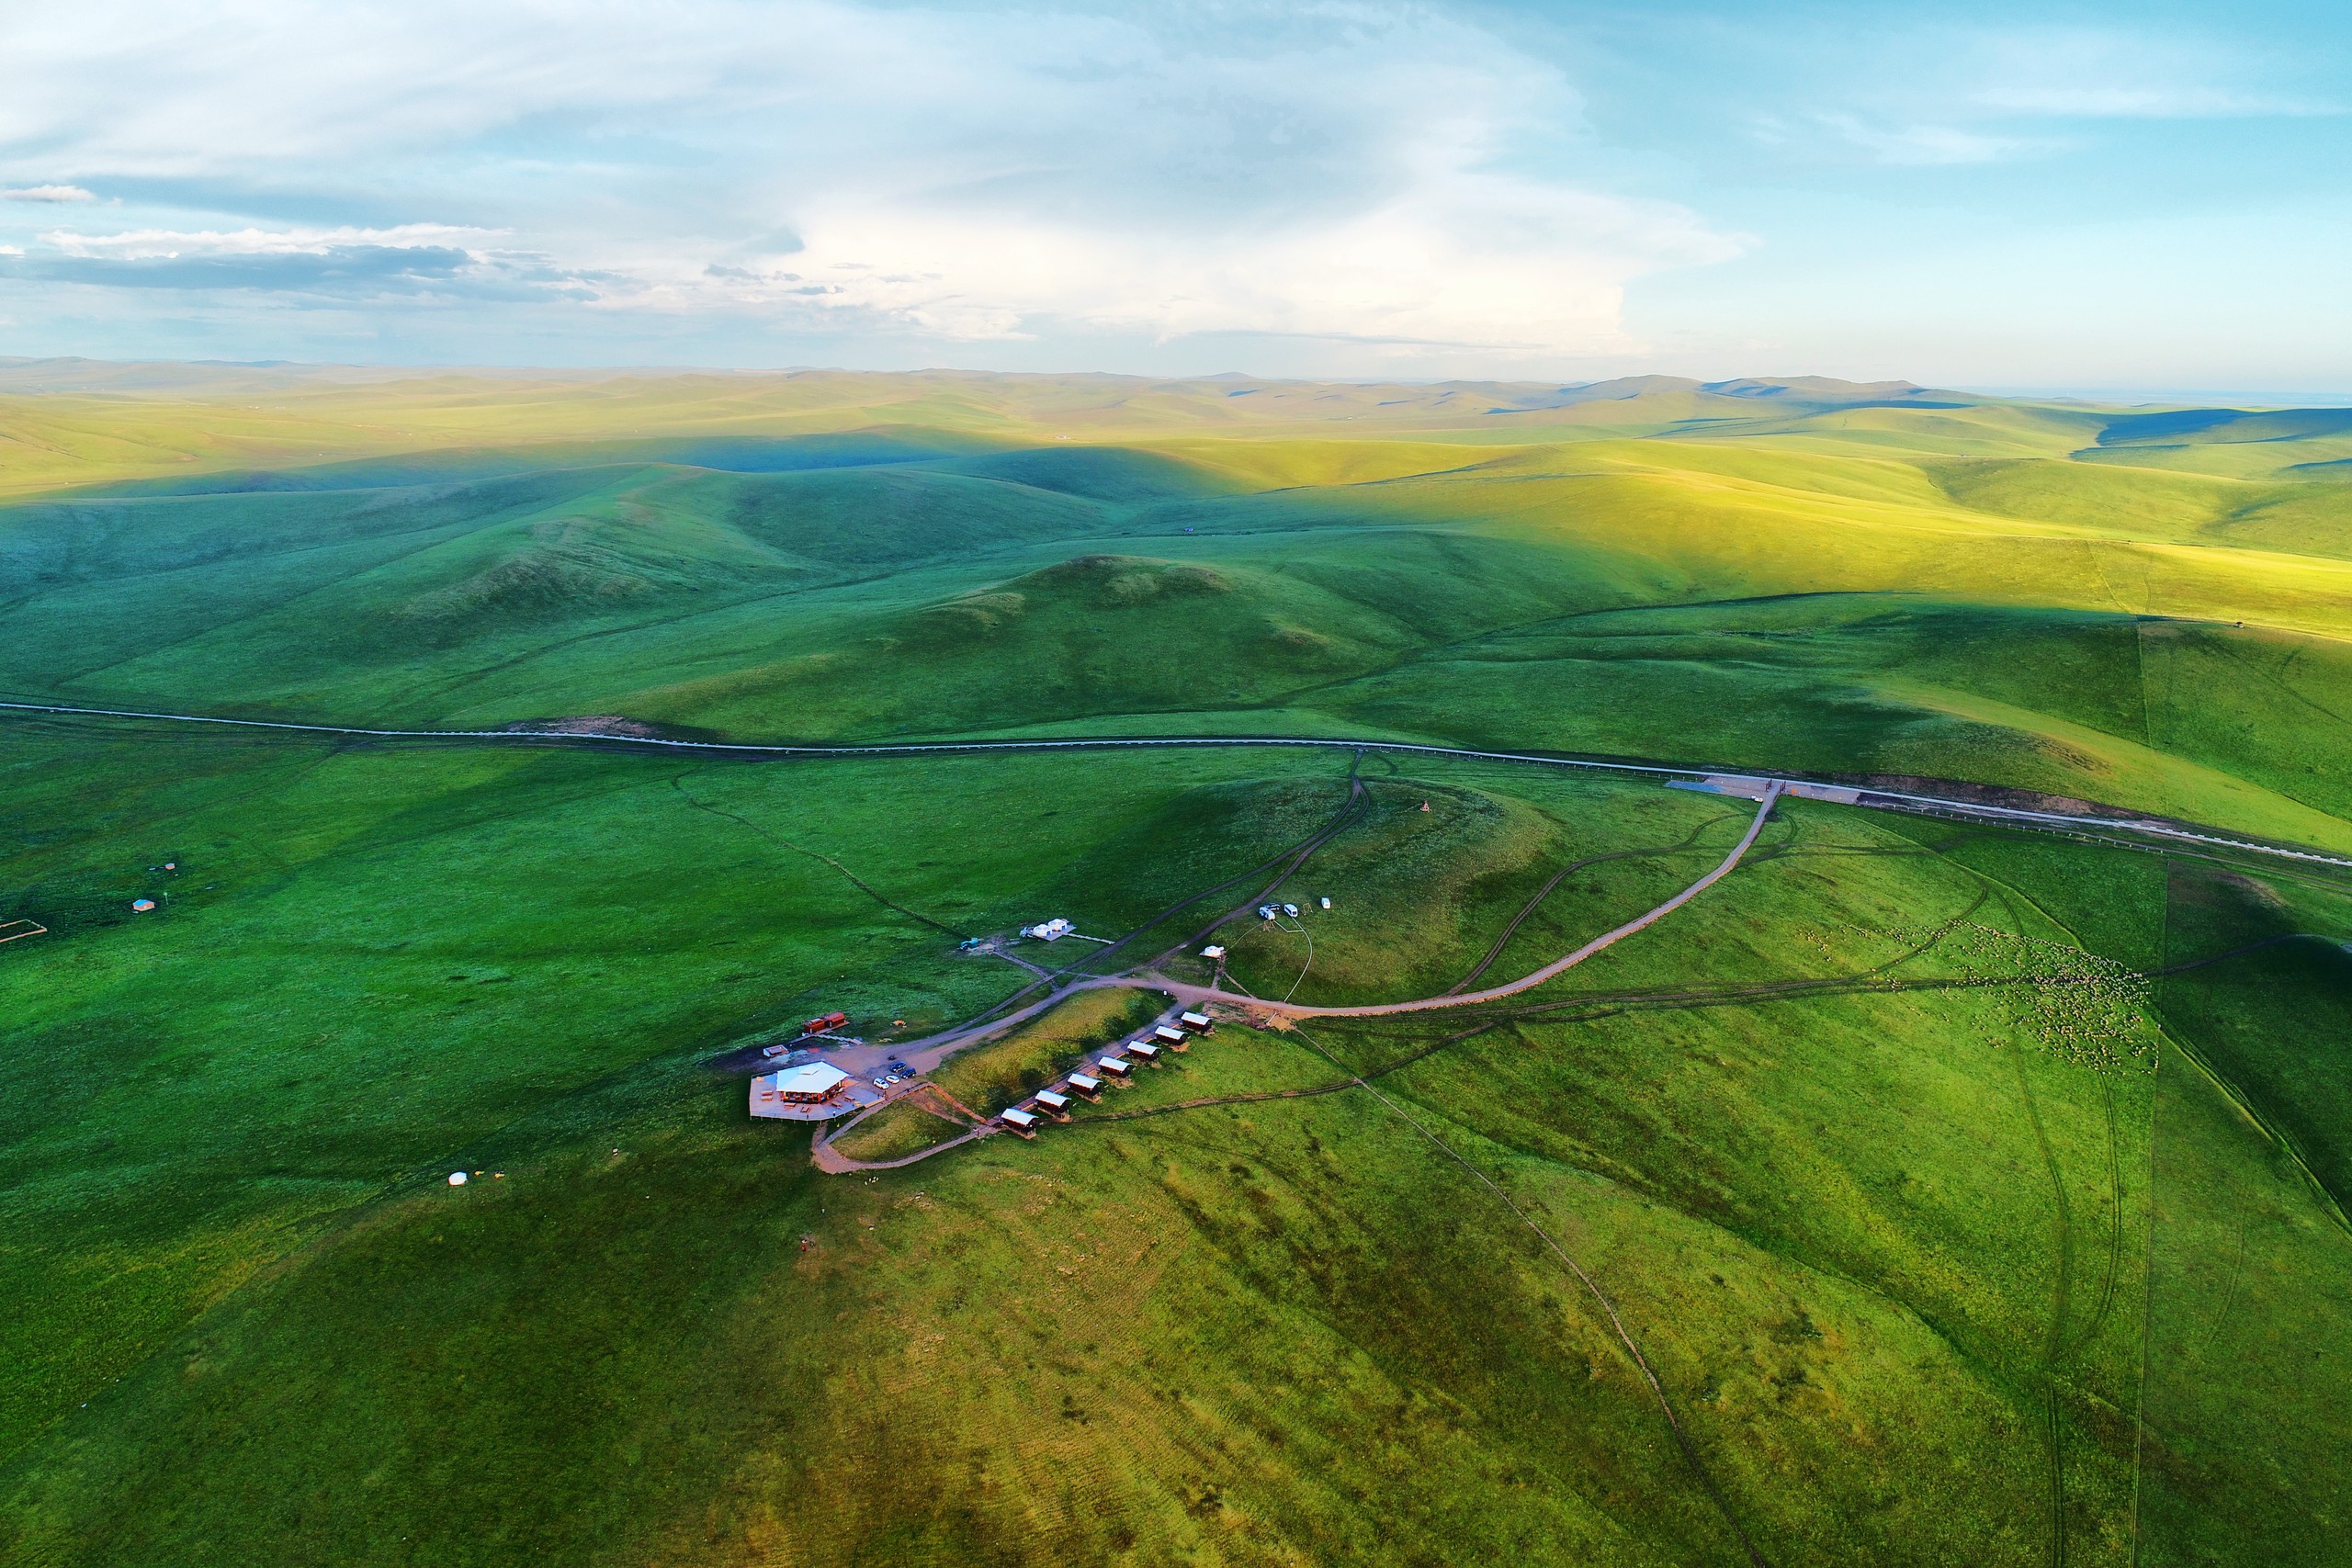 A bird's-eye view of the Hulunbuir Grassland in Inner Mongolia /IC